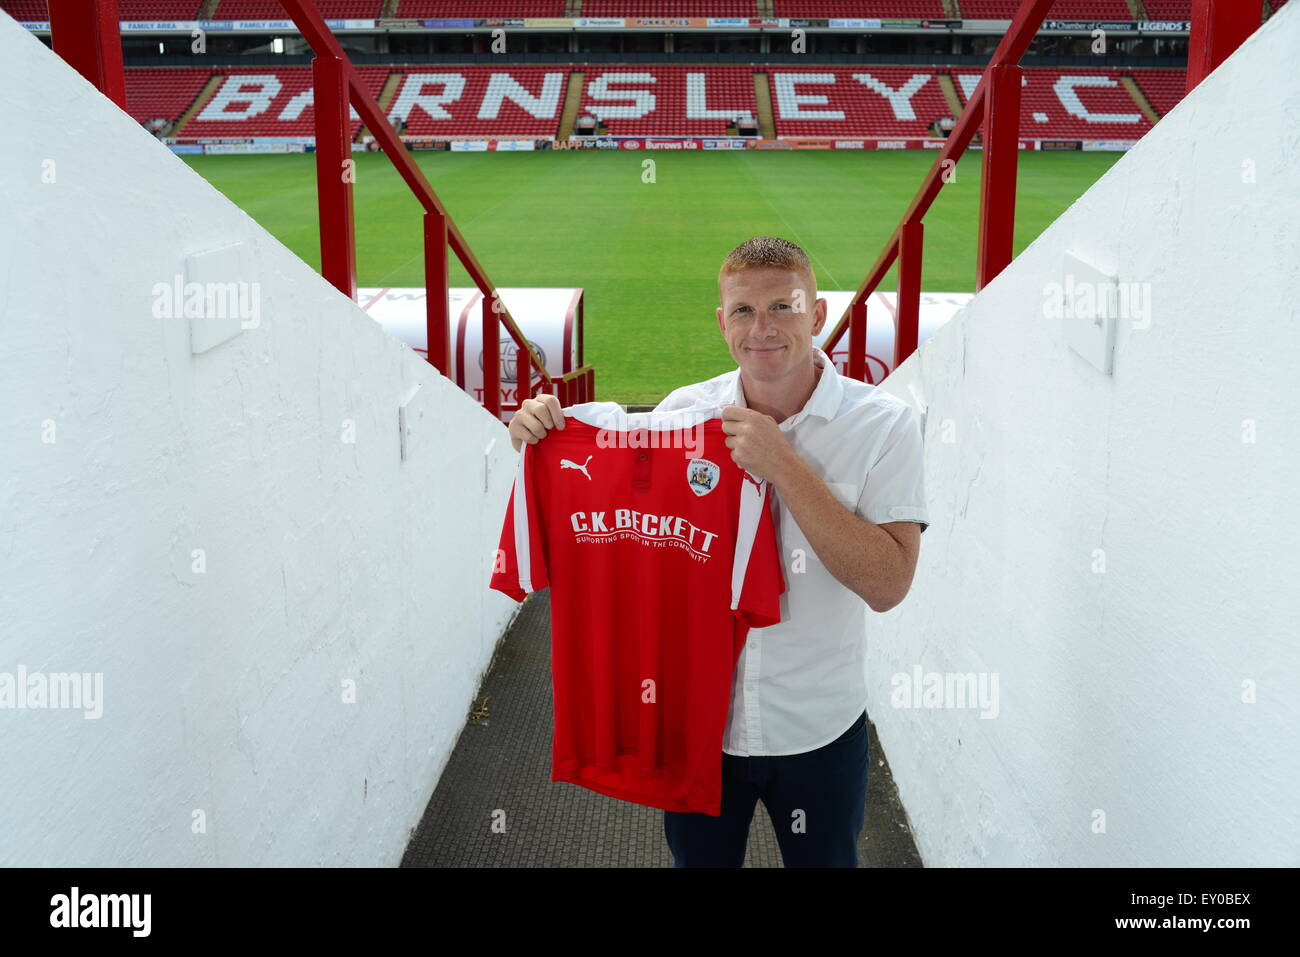 Ex Barnsley FC footballer Bobby Hassell at the Barnsley FC Football Ground. Picture: Scott Bairstow/Alamy Stock Photo